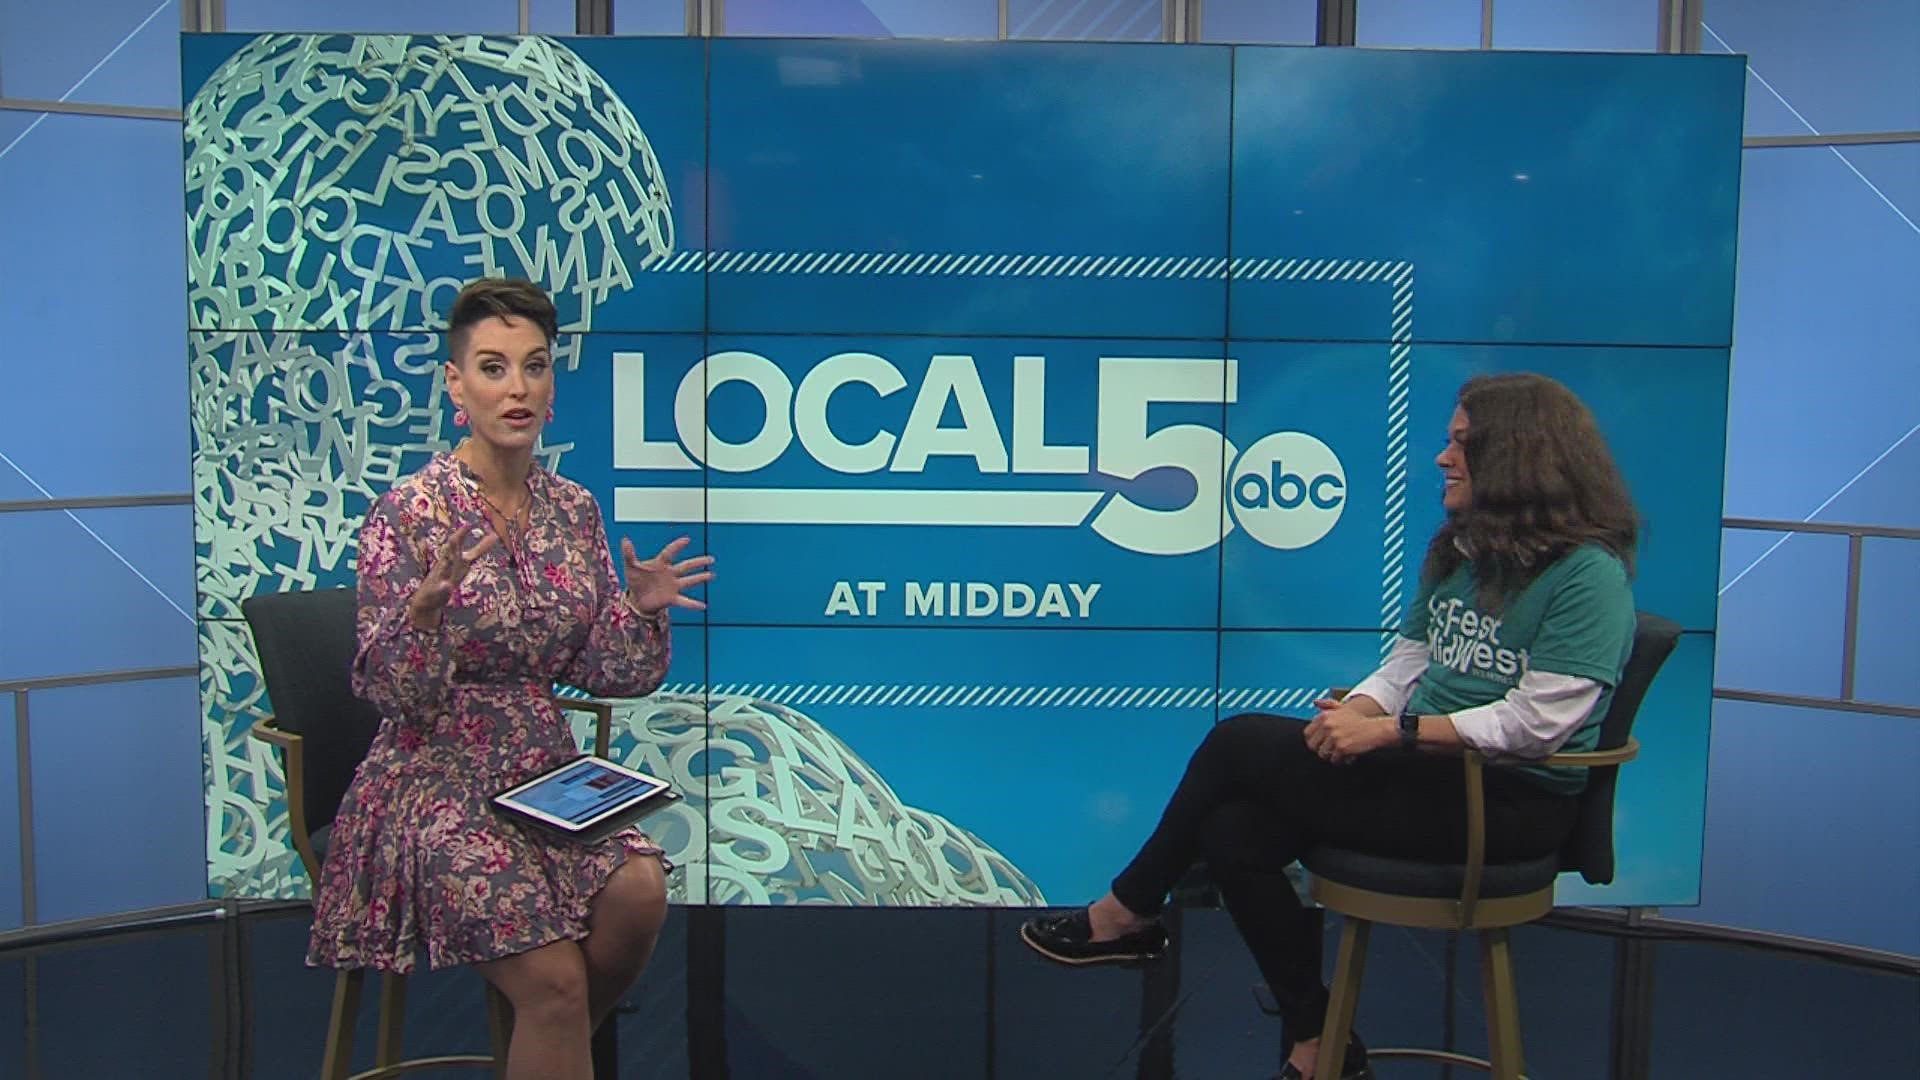 Virginia Barrette, the director of ArtFest Midwest, shares what's in store this weekend at the Iowa Events Center.